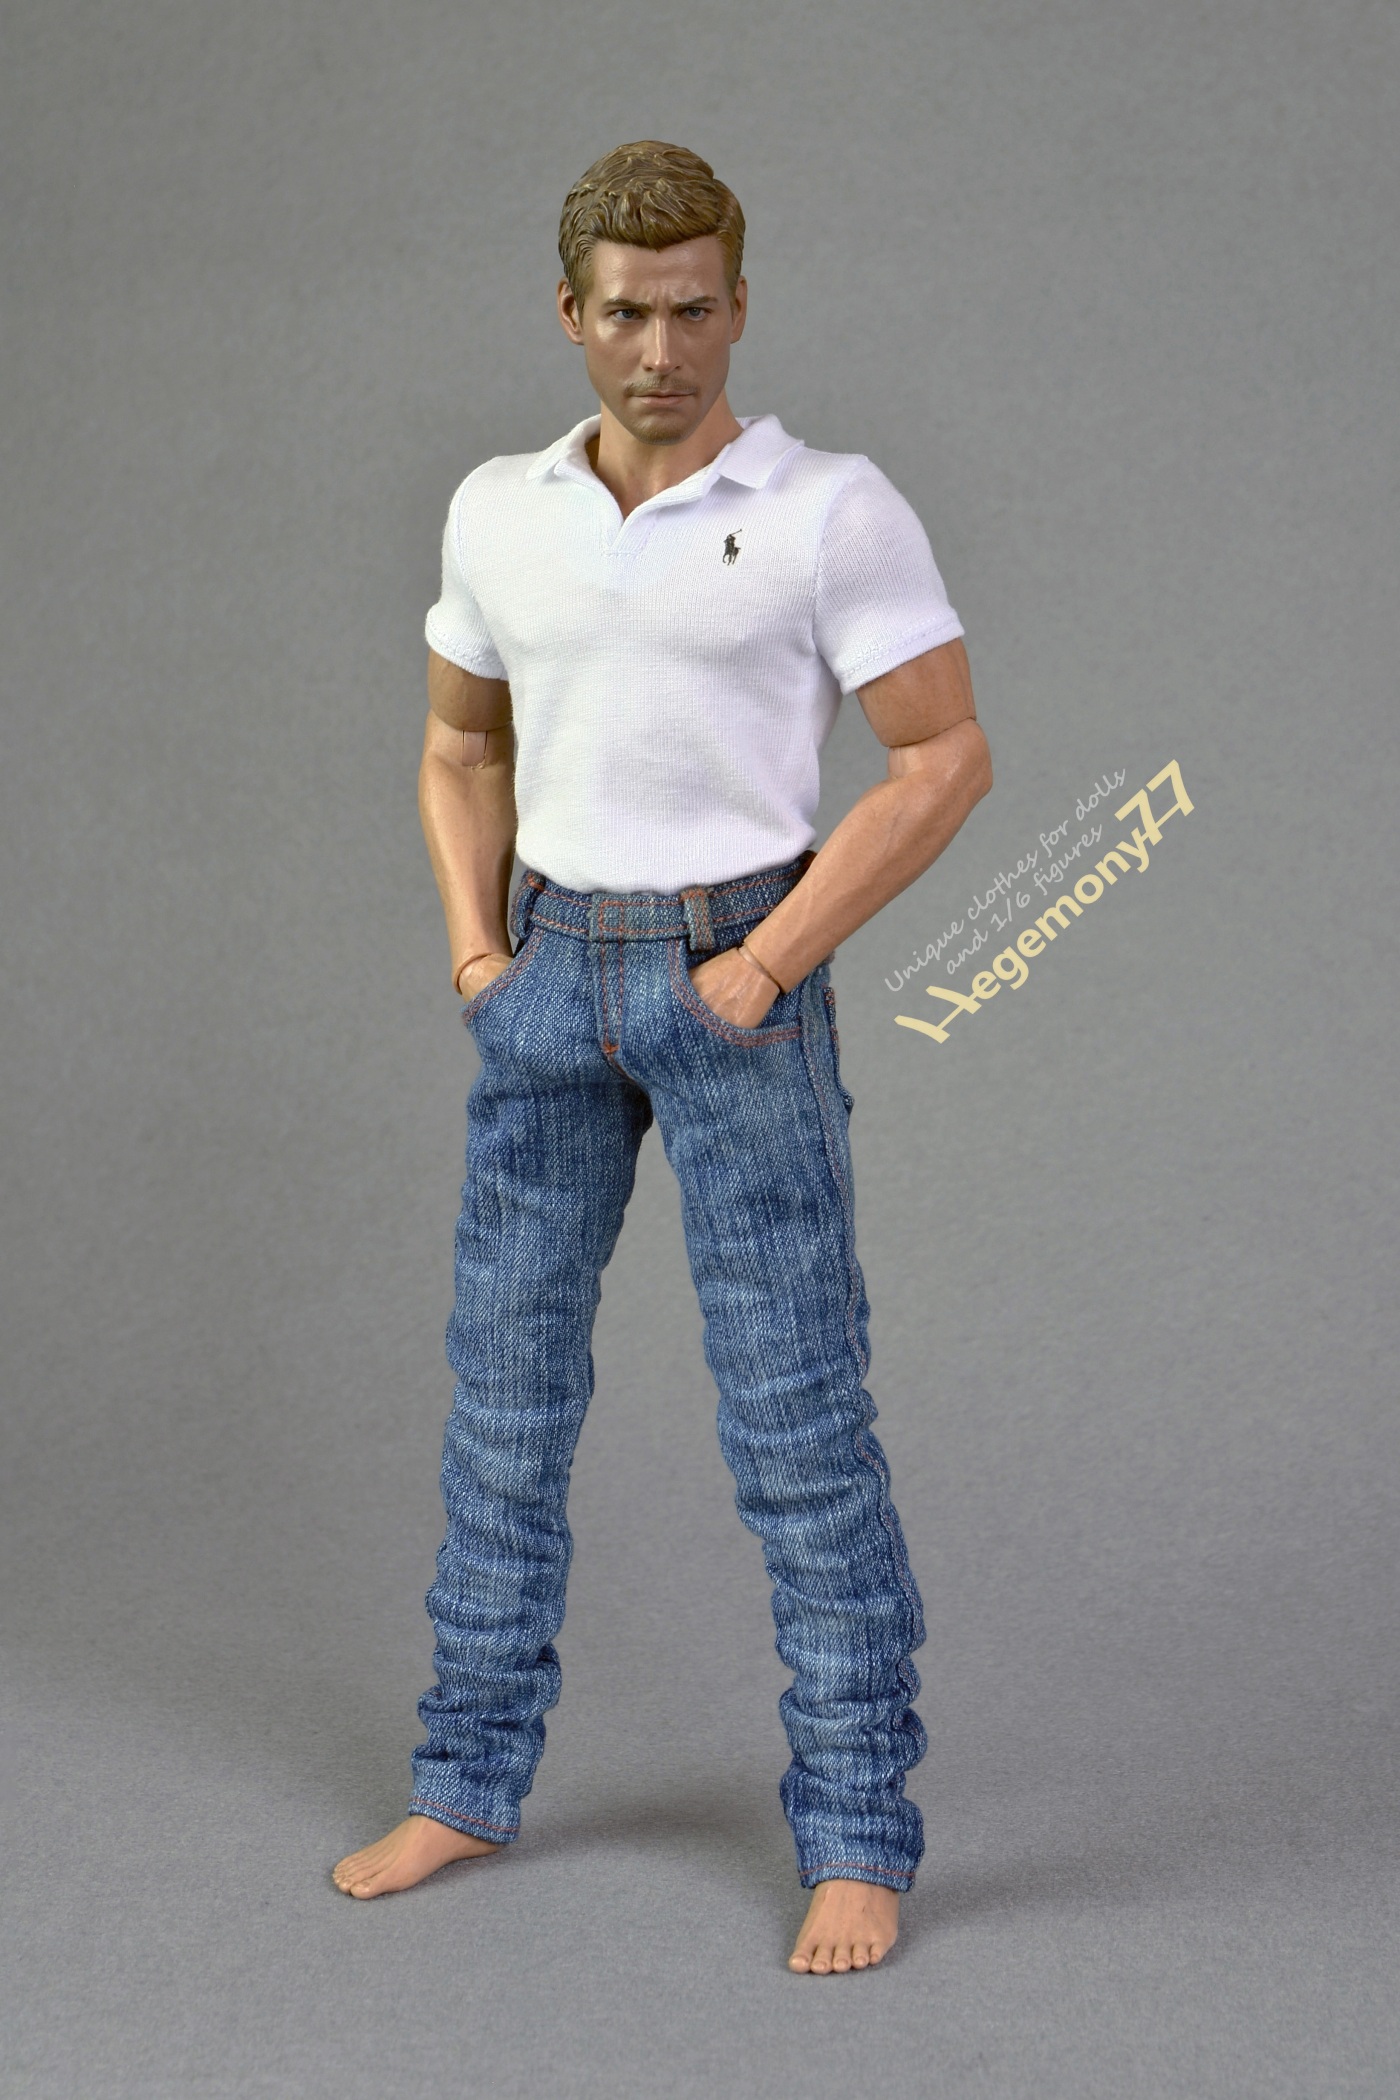 1/6 Male Clothes Denim Jeans Pants Trousers Outfit for 12'' Figur...